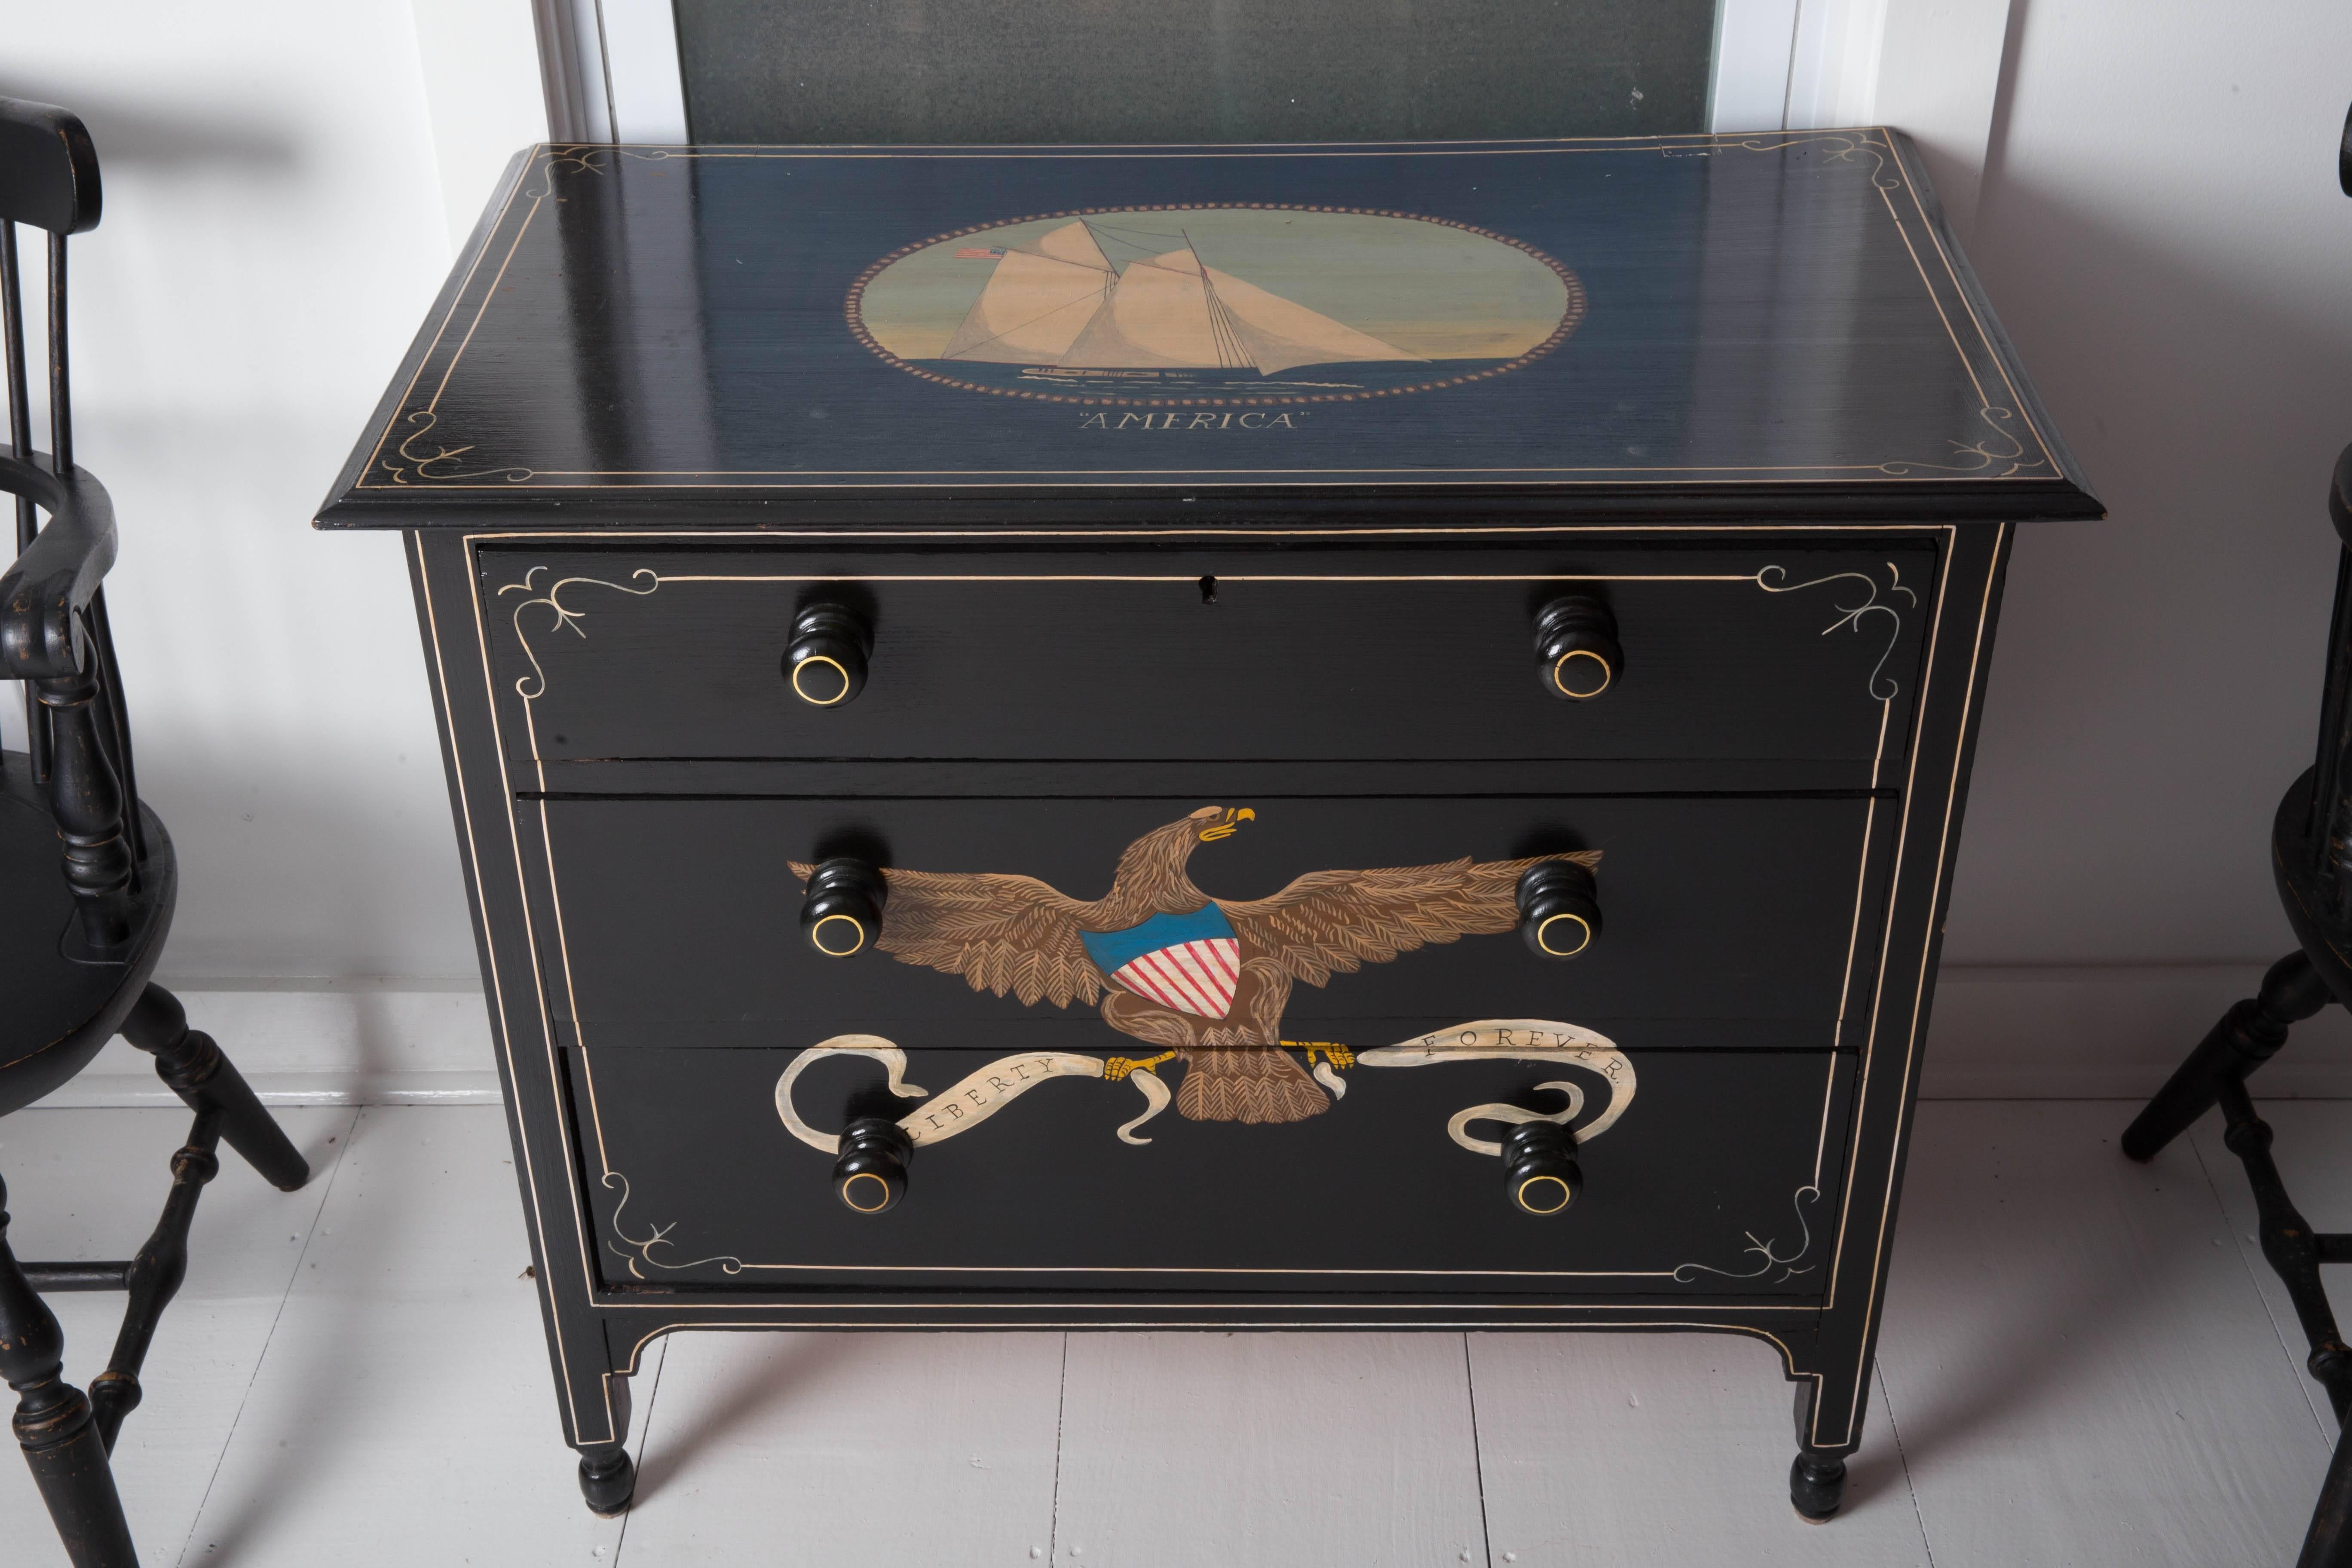 Hand-painted nautical/eagle decorated chest of drawers. Black with nautical painted decorations of a sailing Ship 'America' on the top and colorful eagle and anchors on the front and sides. The chest consists of a three drawers, circa 1950.